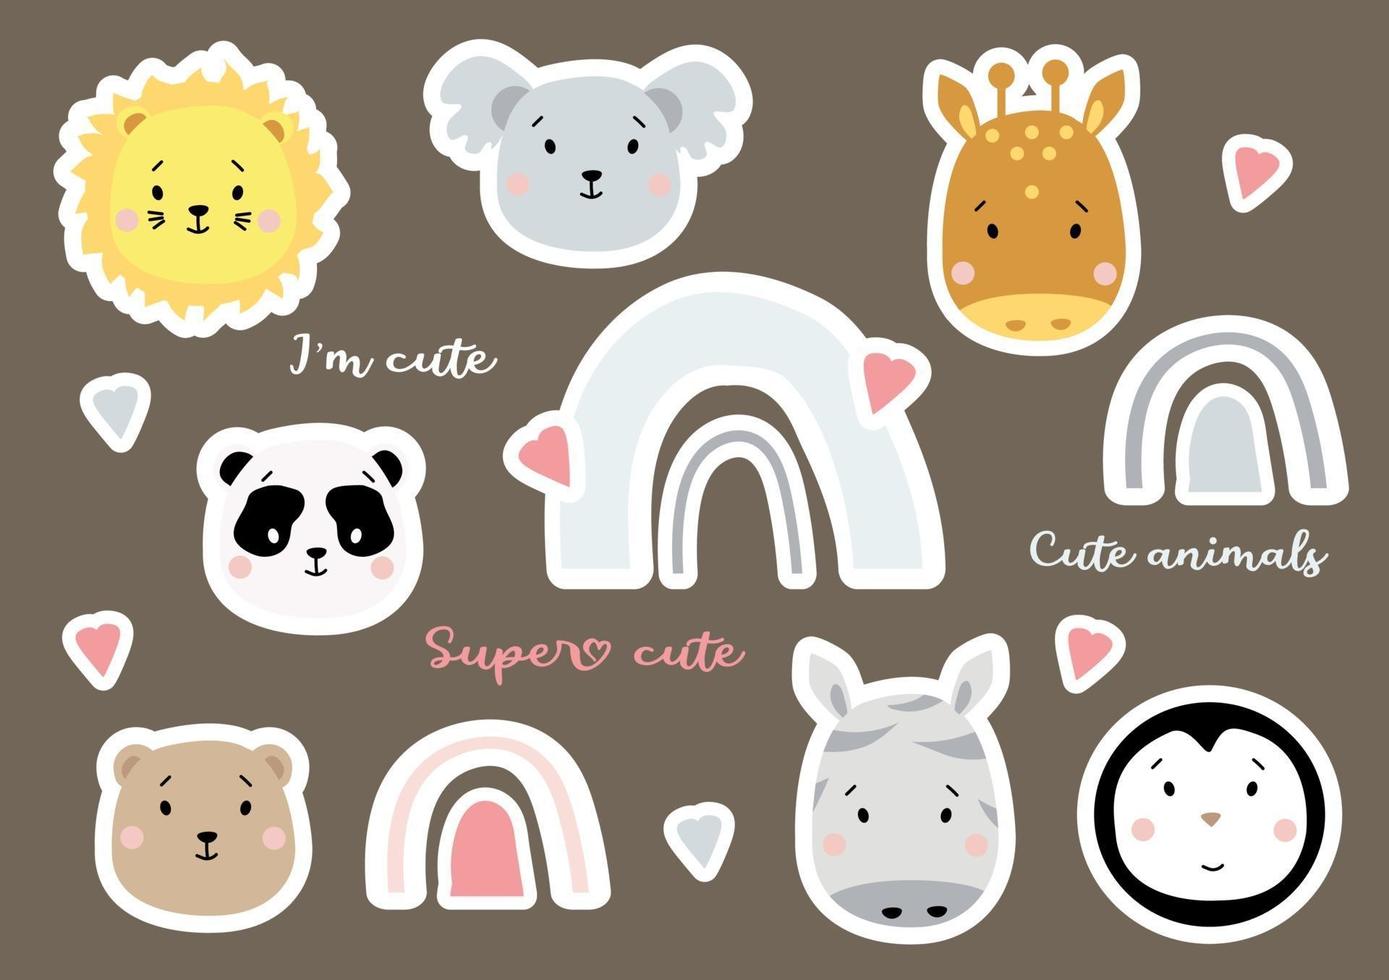 Set of cute rainbows and tropical animals - penguin, lion and koala, giraffe and panda, bear and zebra. Kids collection of vector stickers. Isolated on a background with hearts. Element for design